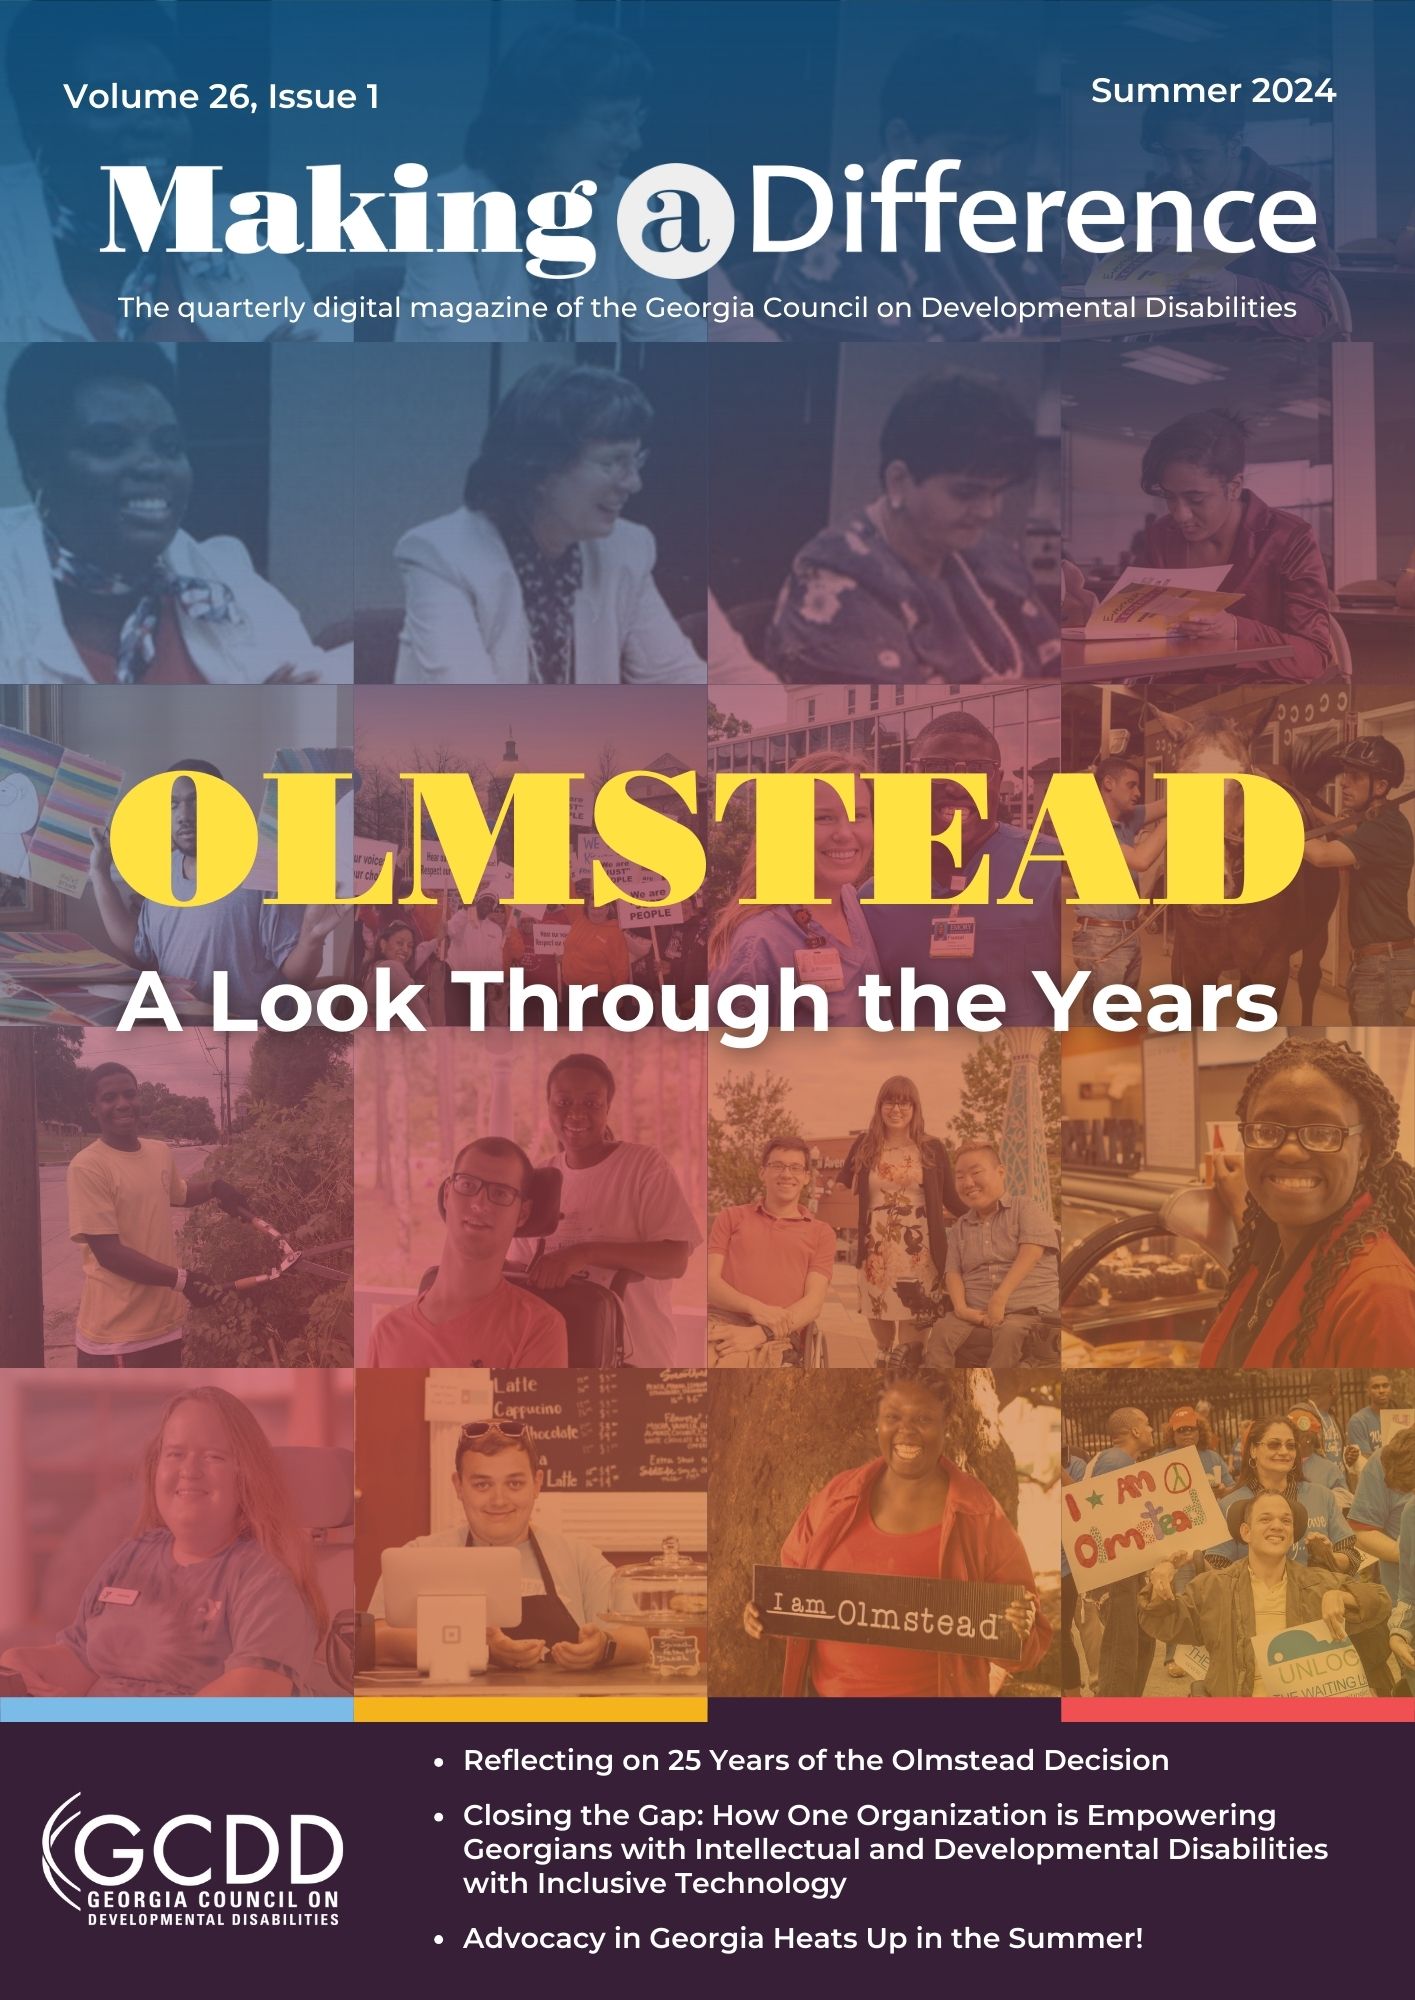 Cover of Making a Difference Summer 2024 Magazine - Olmstead - A Look Throughout the Years